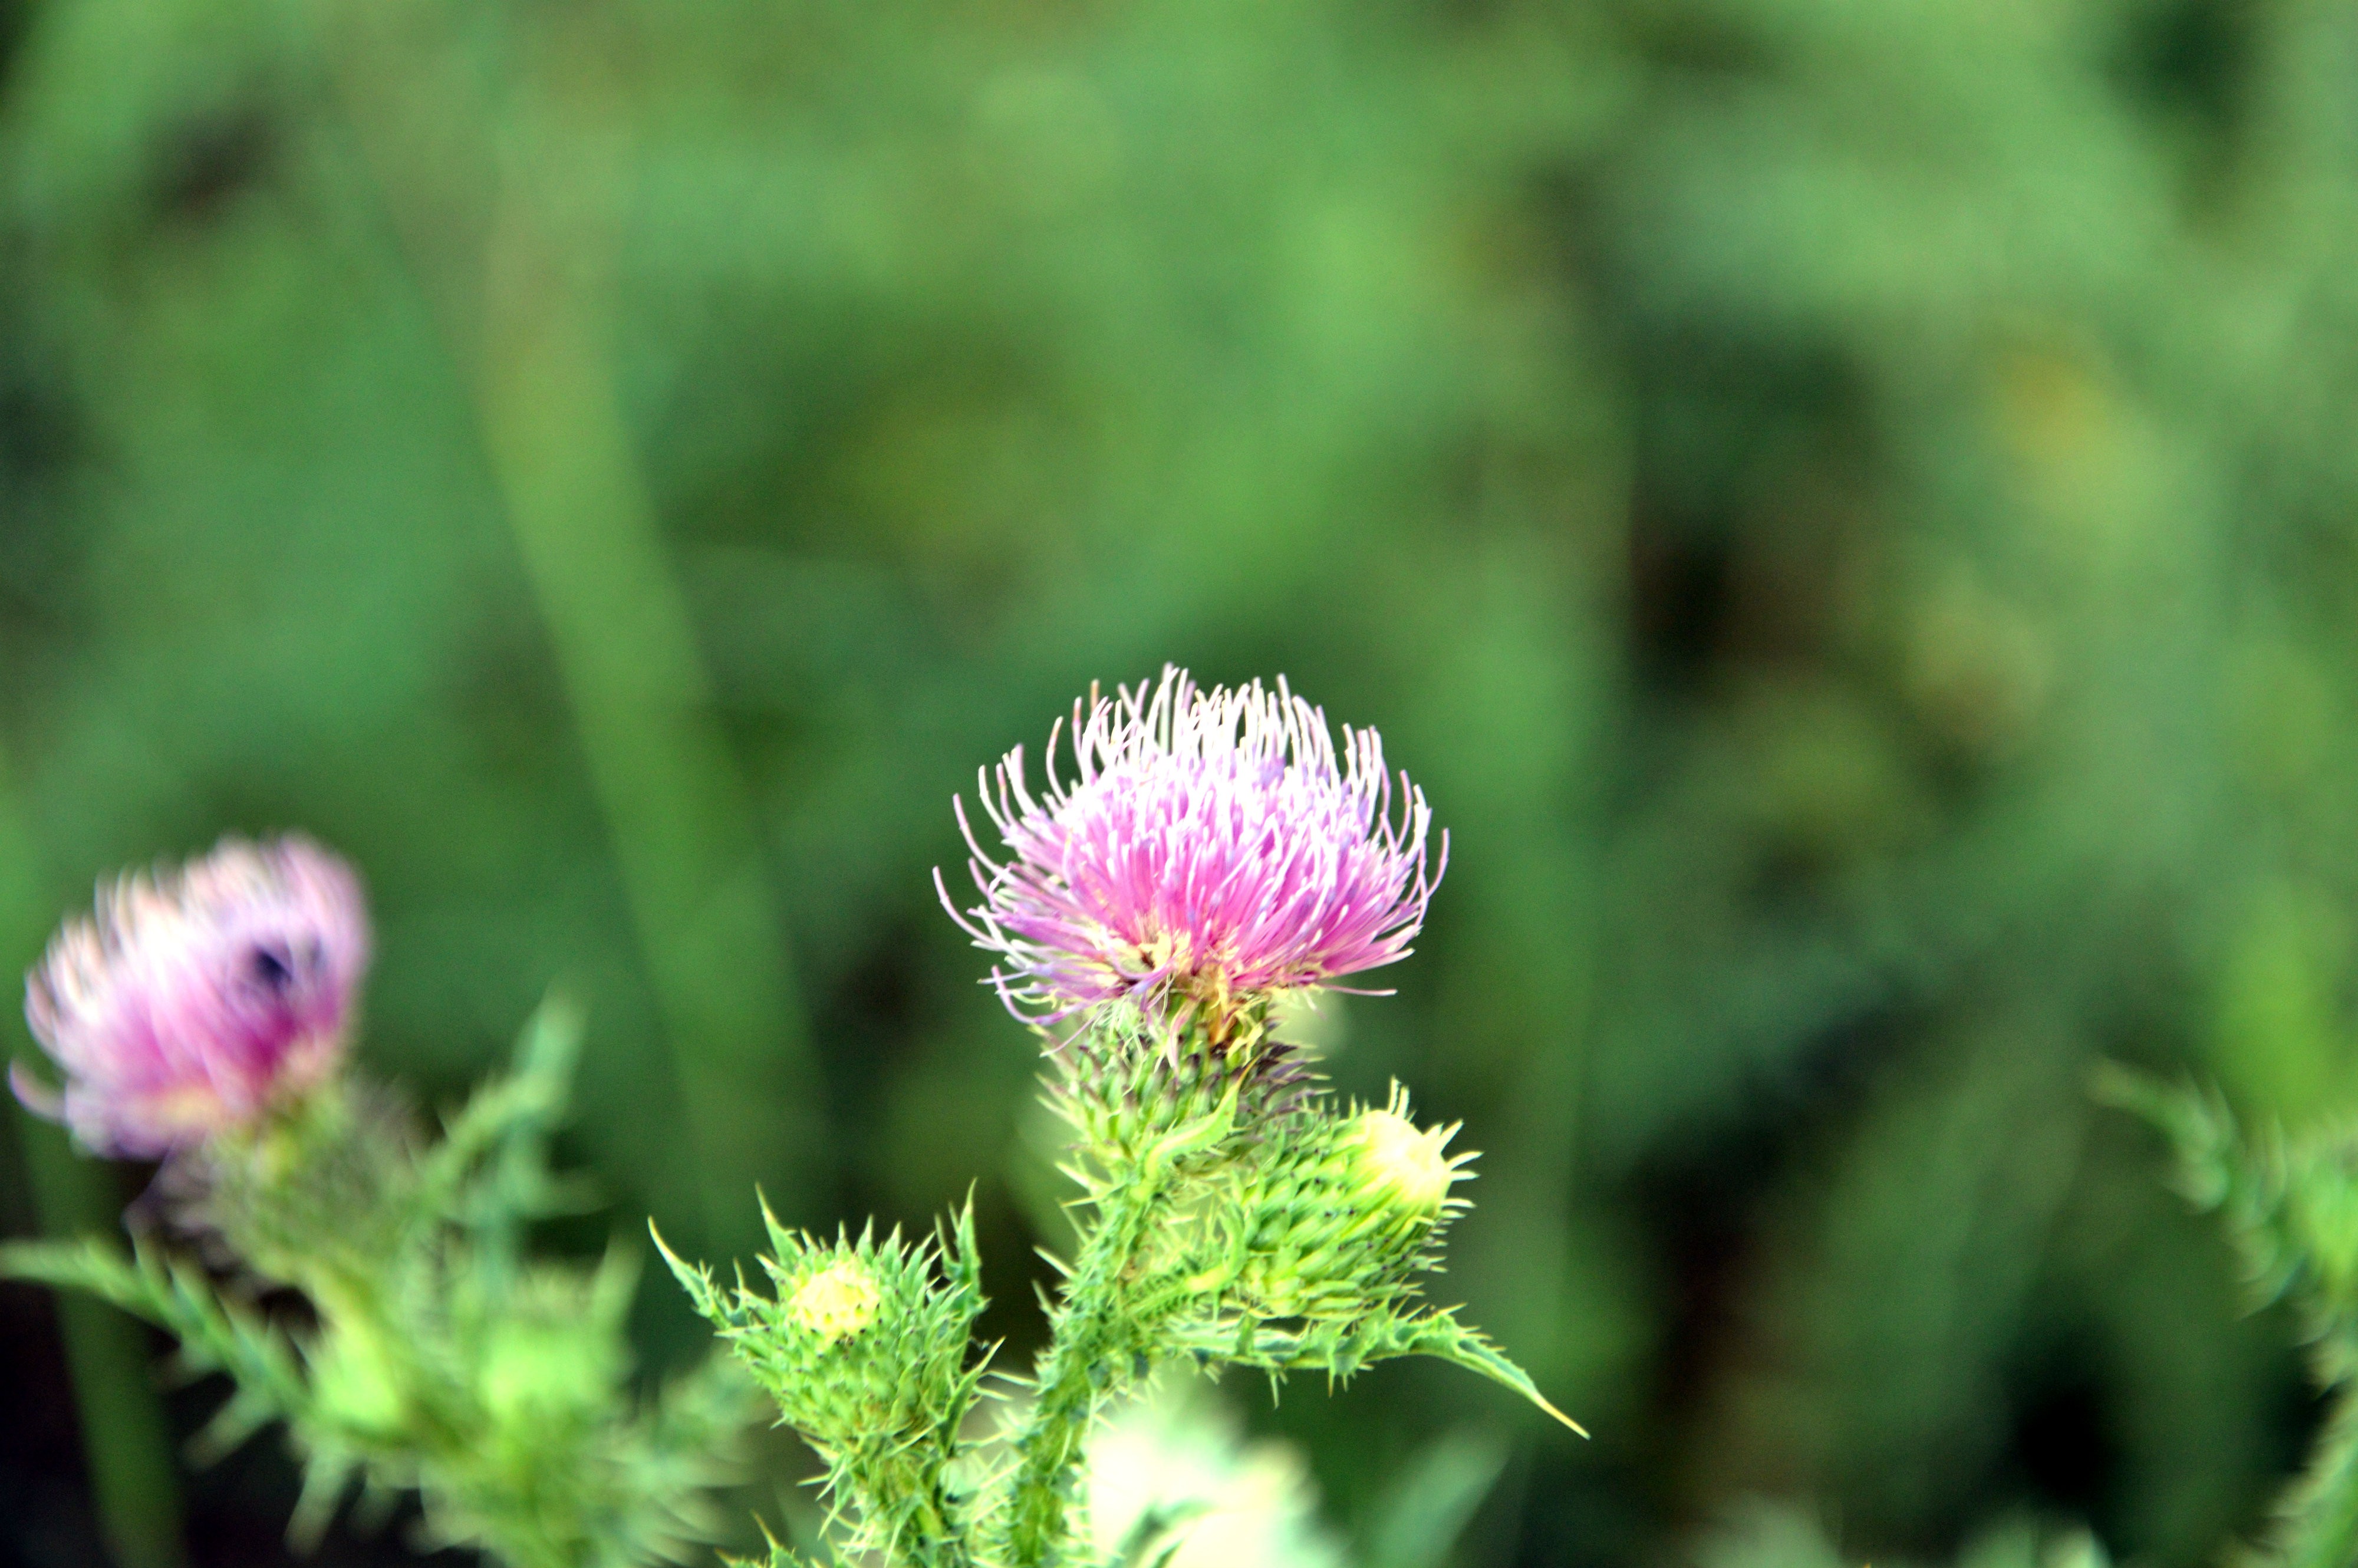 General 4000x2660 nature plants green thistles